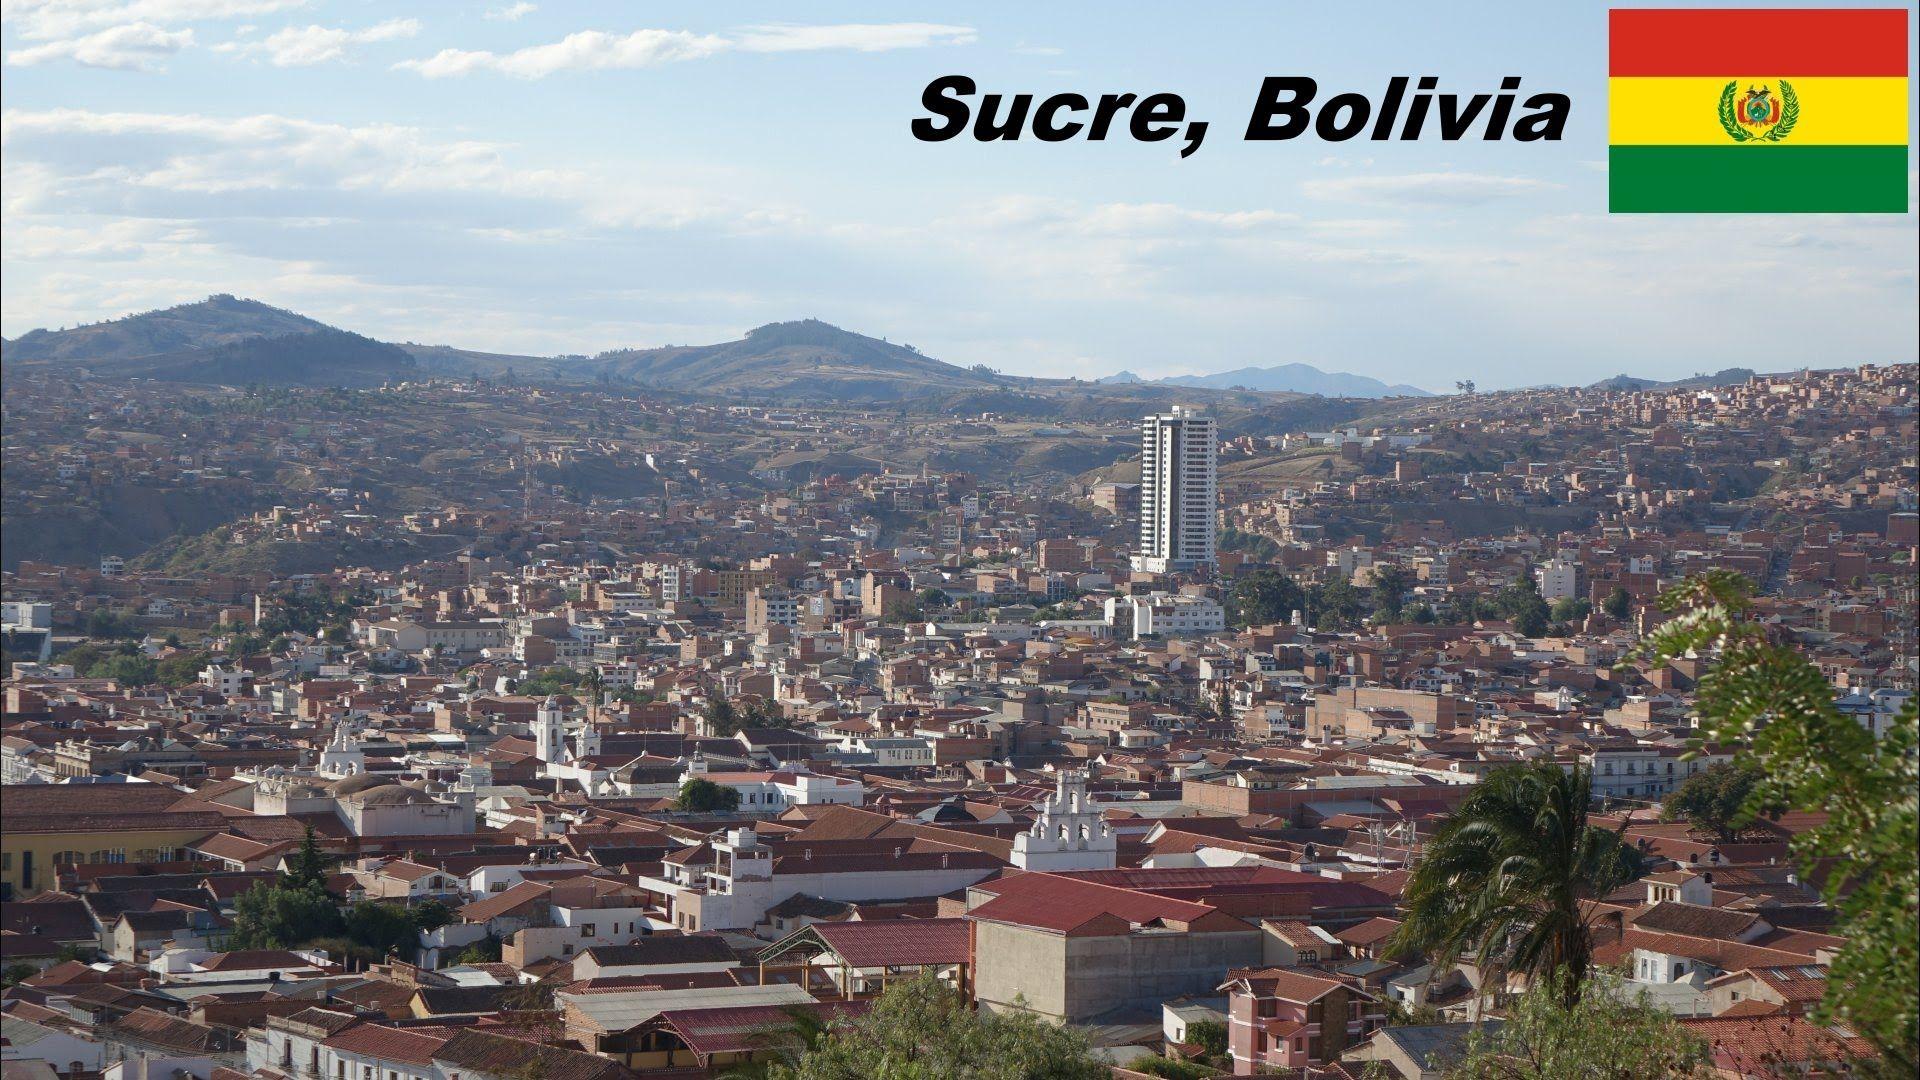 Travel to South America: My trip to the city of SUCRE, BOLIVIA